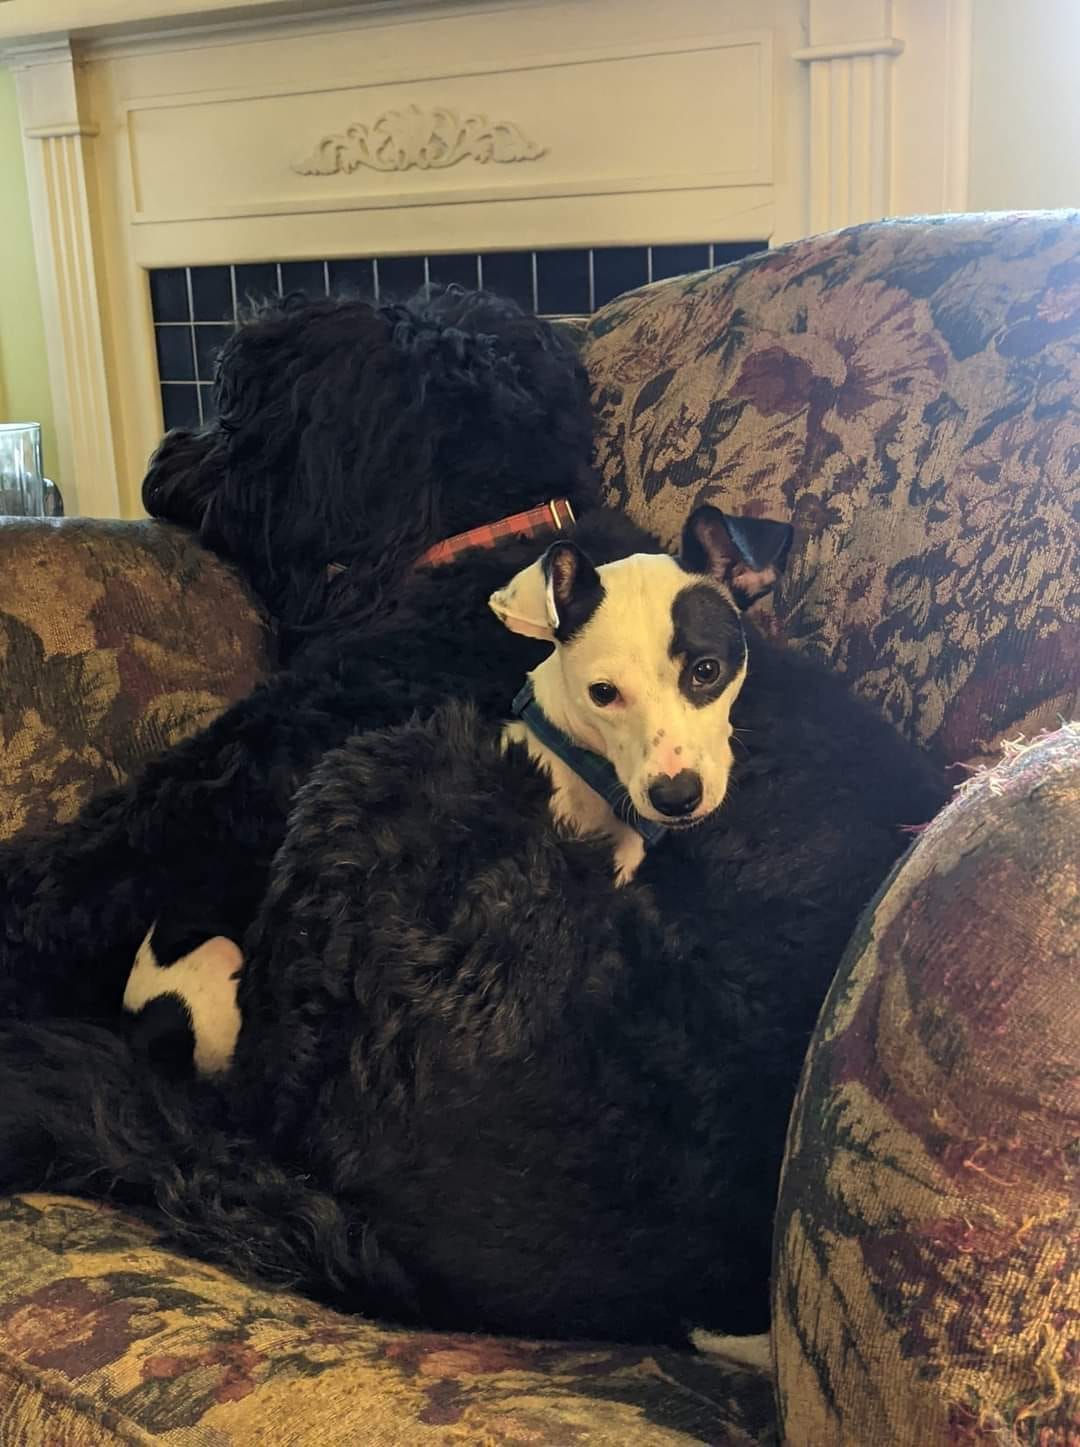 A small black and white dog lies with a giant black dog curled around him. They look content.